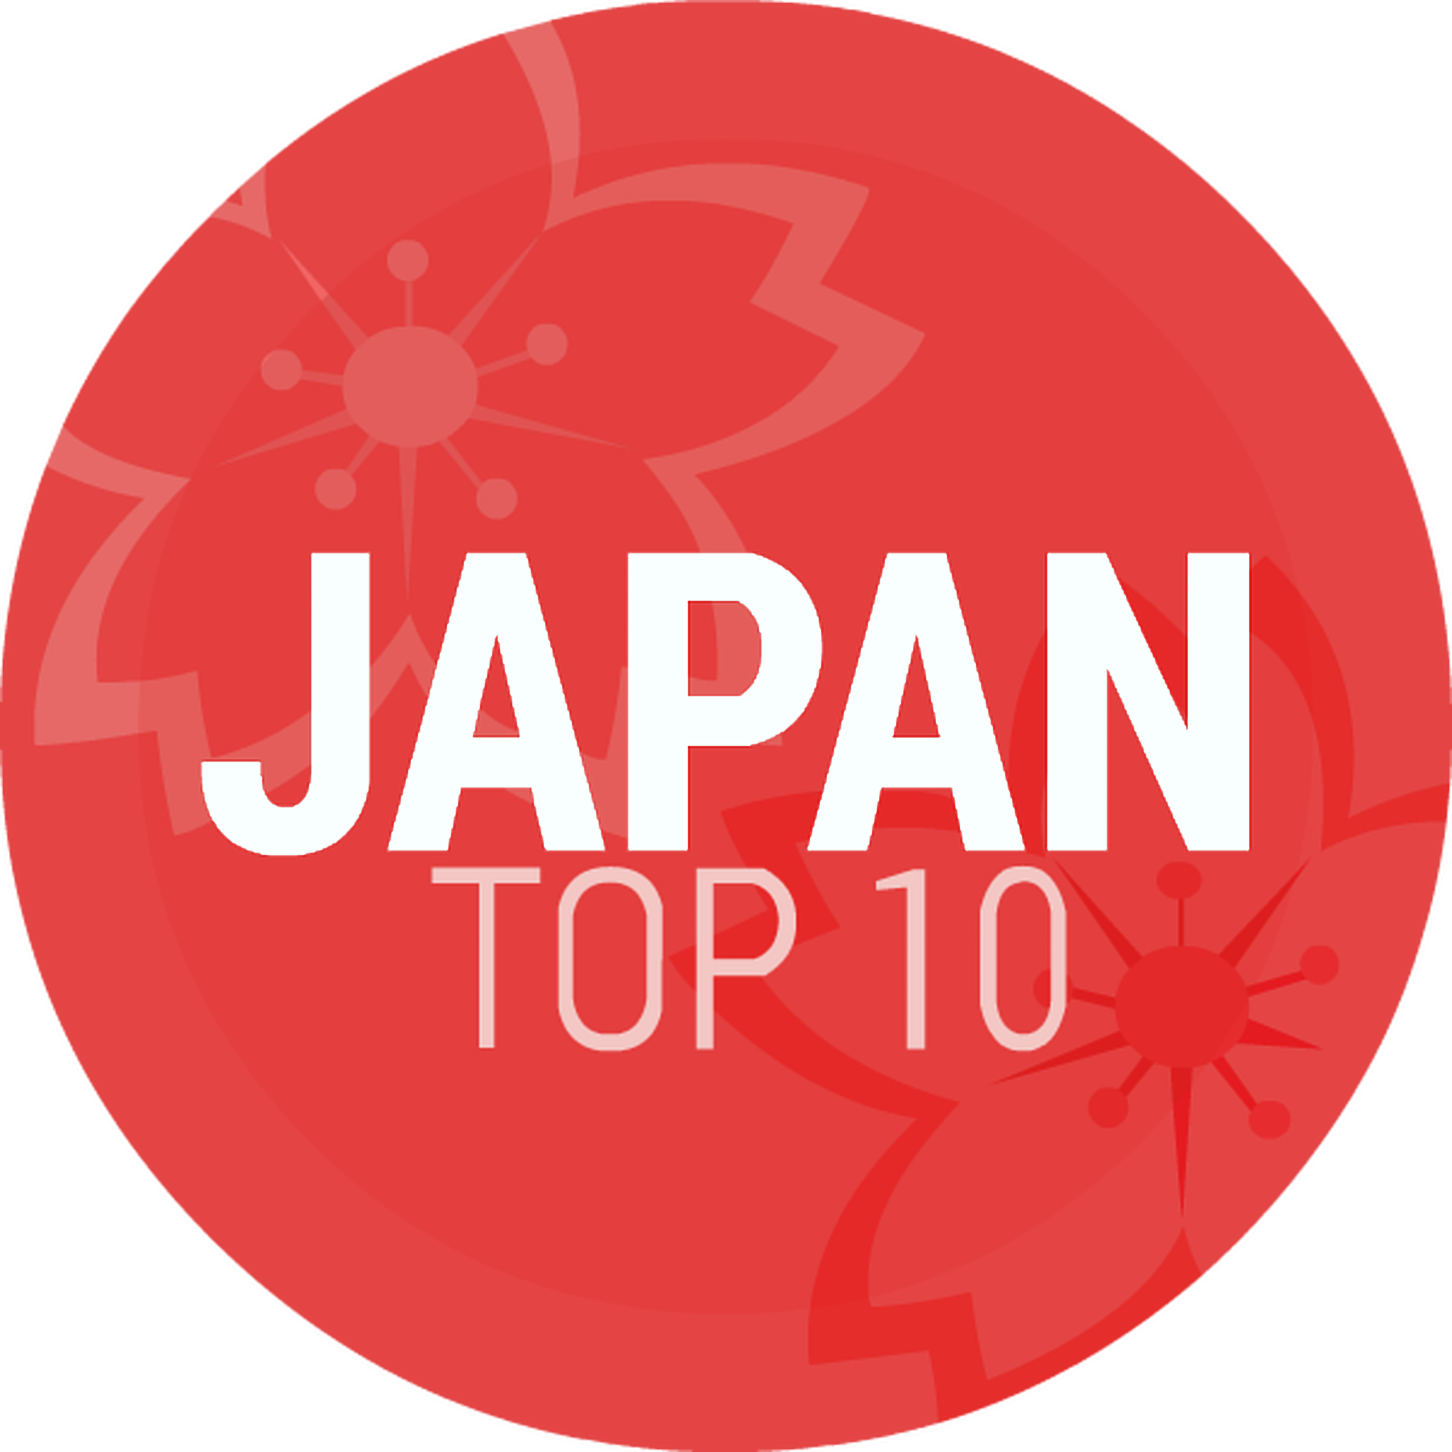 Episode 152: Japan Top 10 Mid/Late September 2016 Countdown